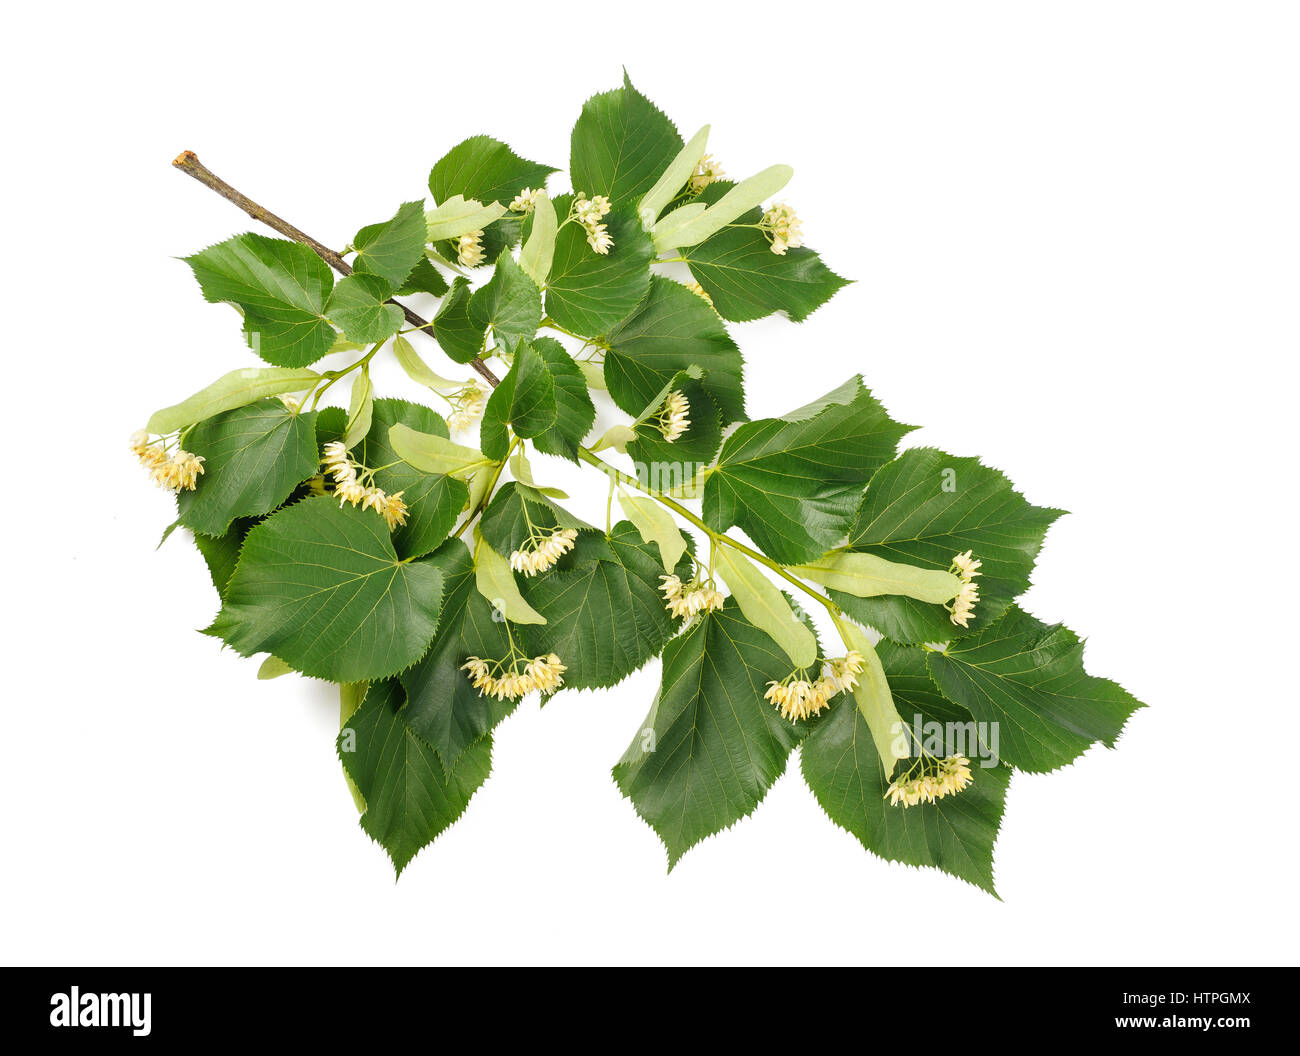 linden branch with bract and flowers isolated on white background Stock Photo